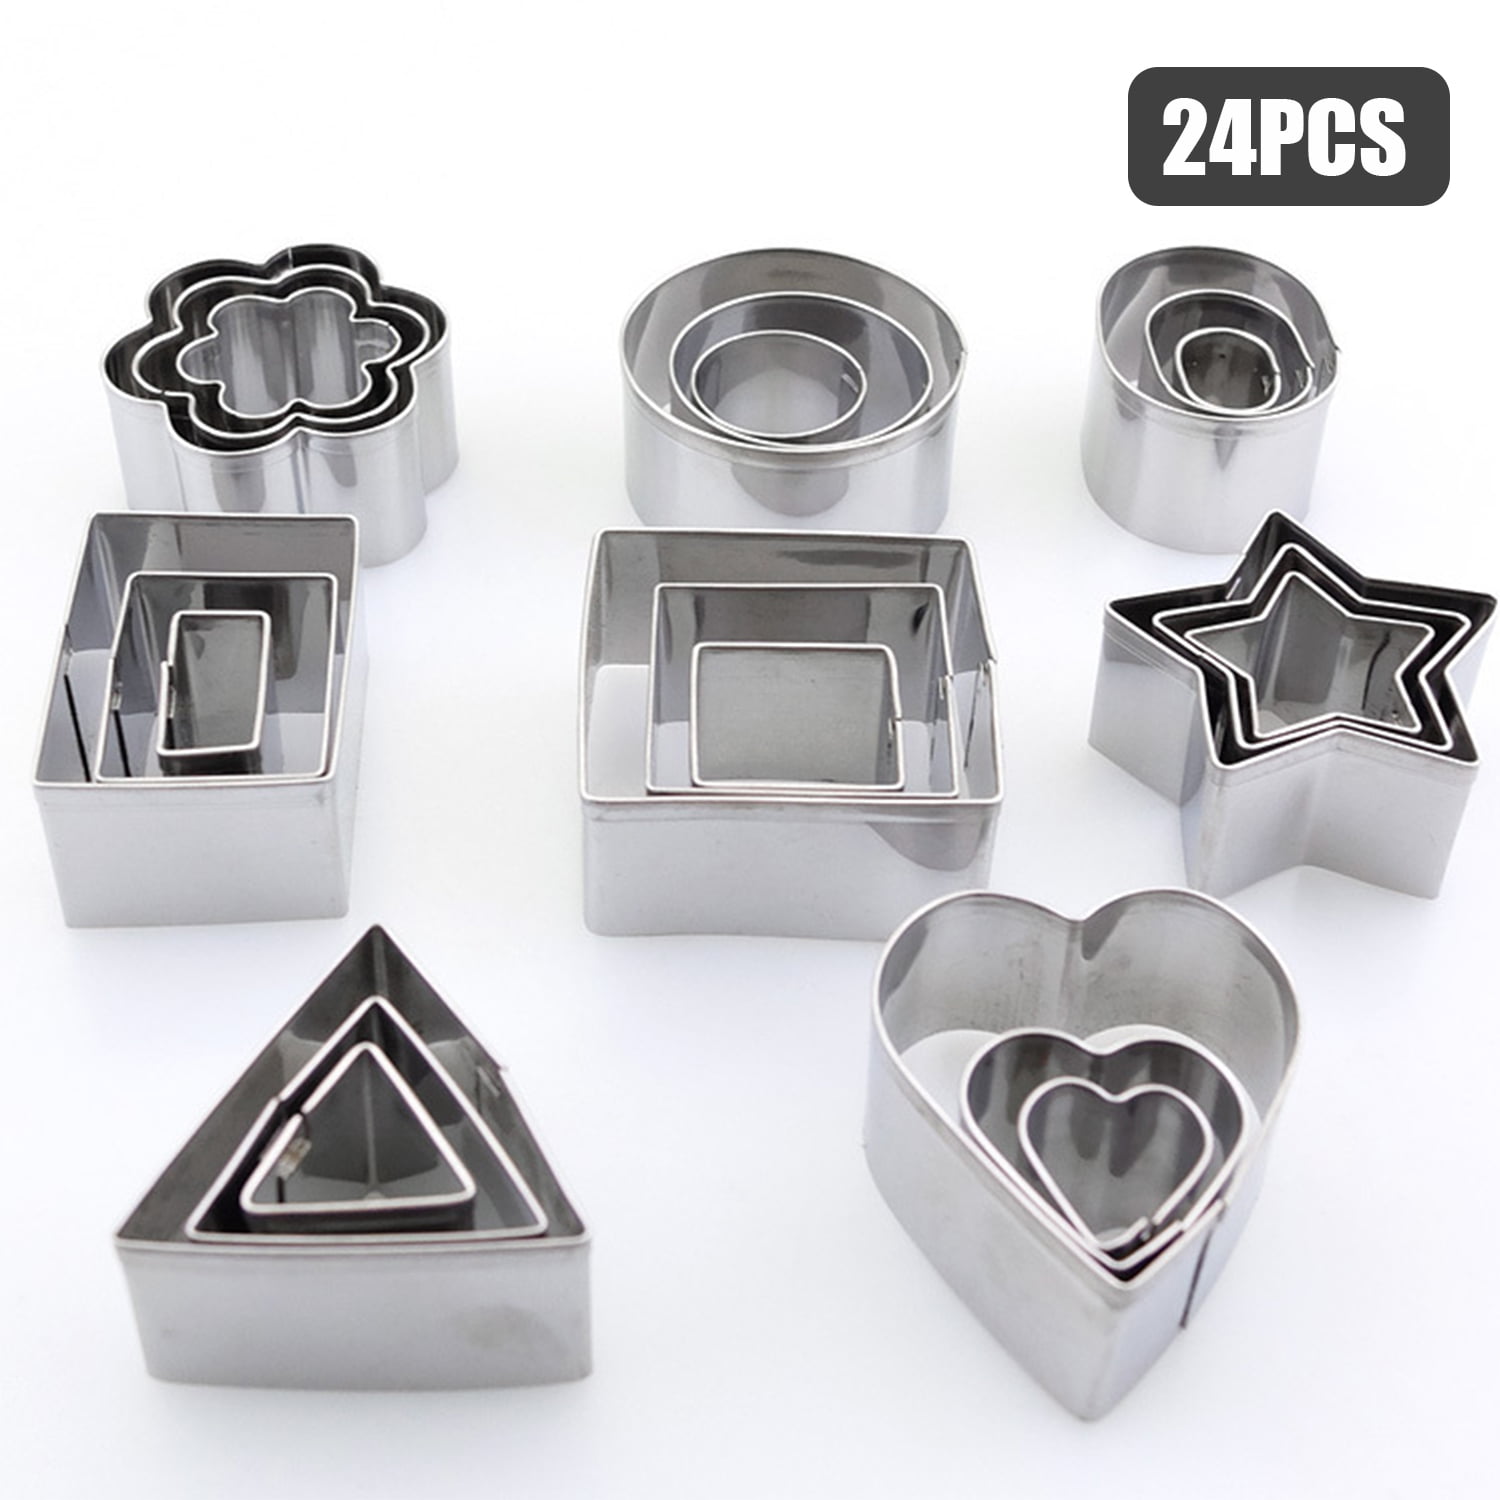 24PC Biscuit Cutters Mini Cookie Cutter Set Stainless Steel Baking Pastry Moulds 